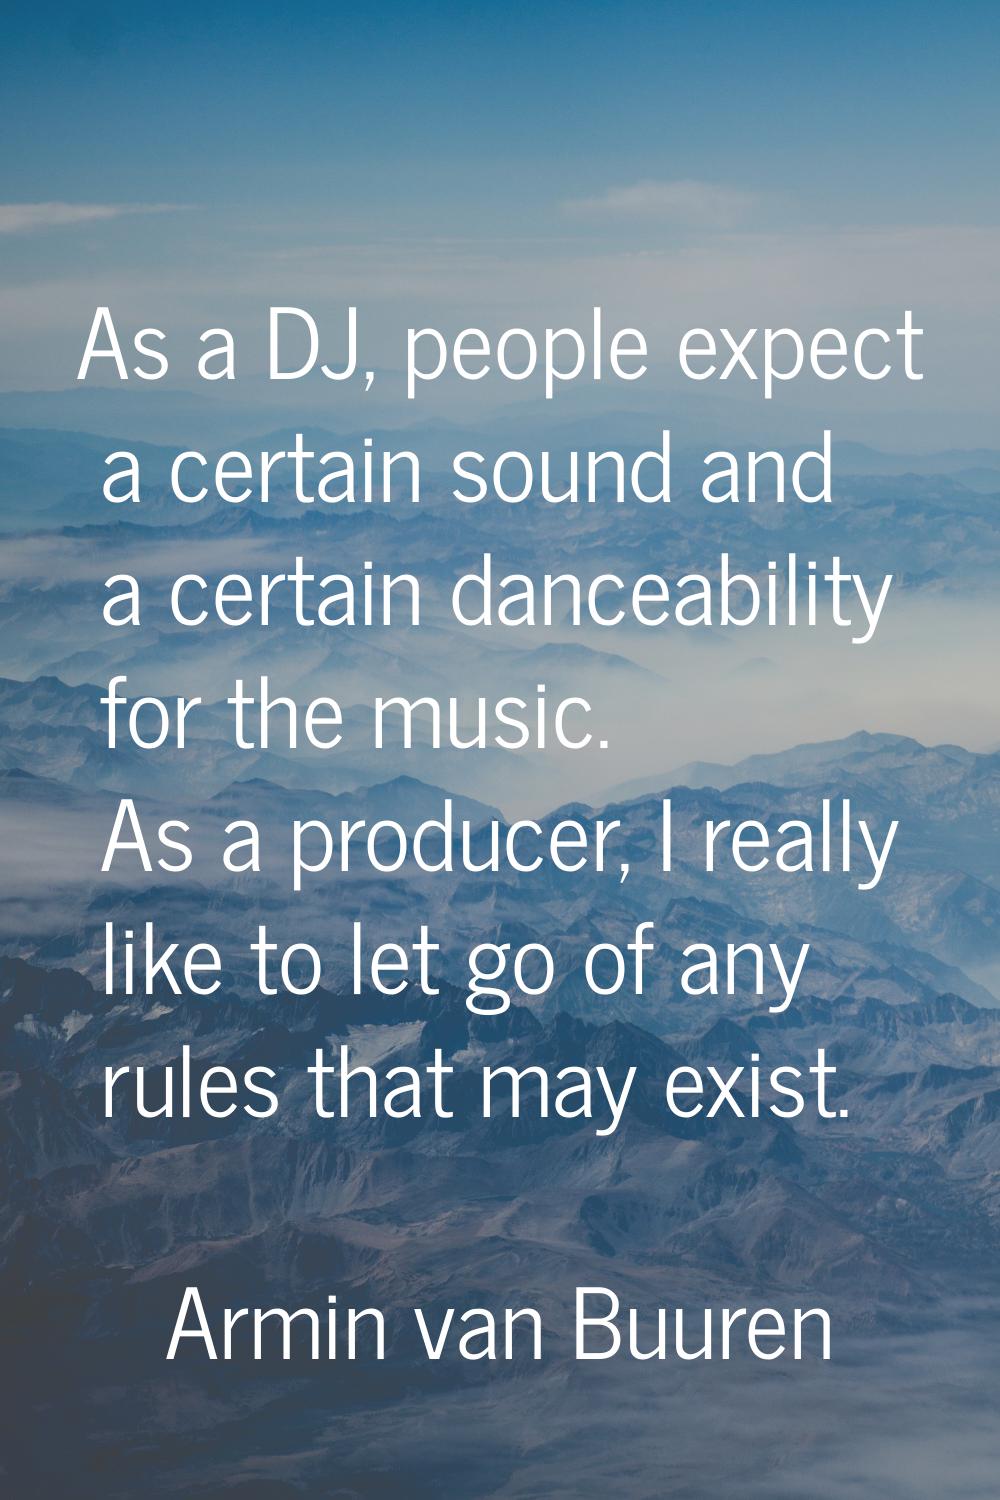 As a DJ, people expect a certain sound and a certain danceability for the music. As a producer, I r